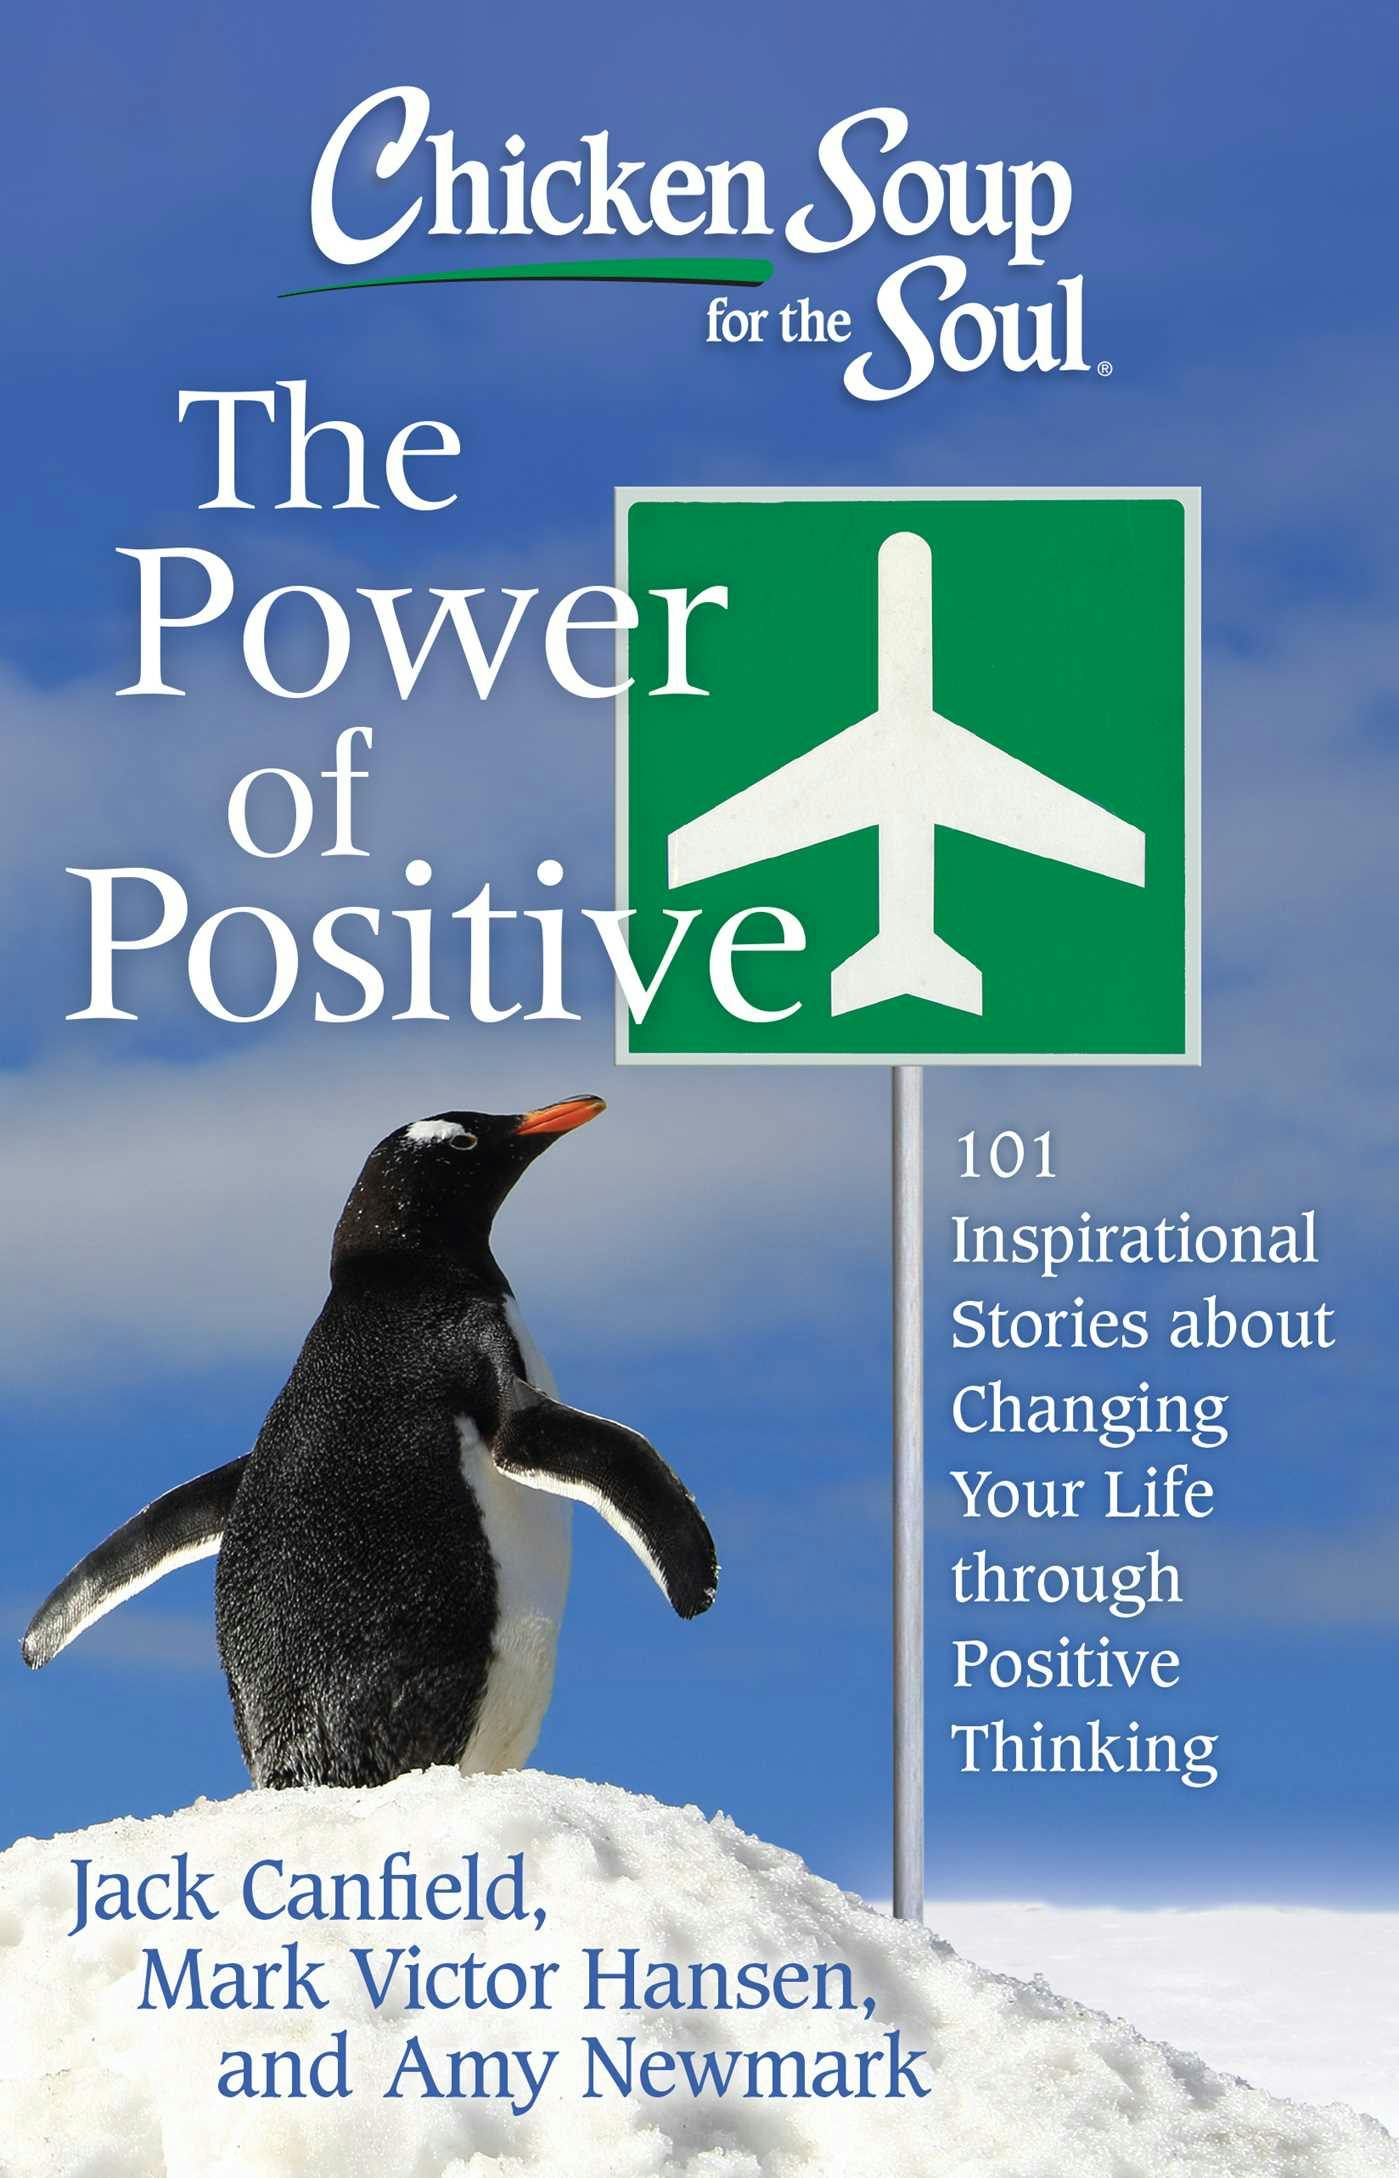 Chicken Soup for the Soul: The Power of Positive: 101 Inspirational Stories about Changing Your Life through Positive Thinking - Mark Victor Hansen, Jack Canfield, Amy Newmark